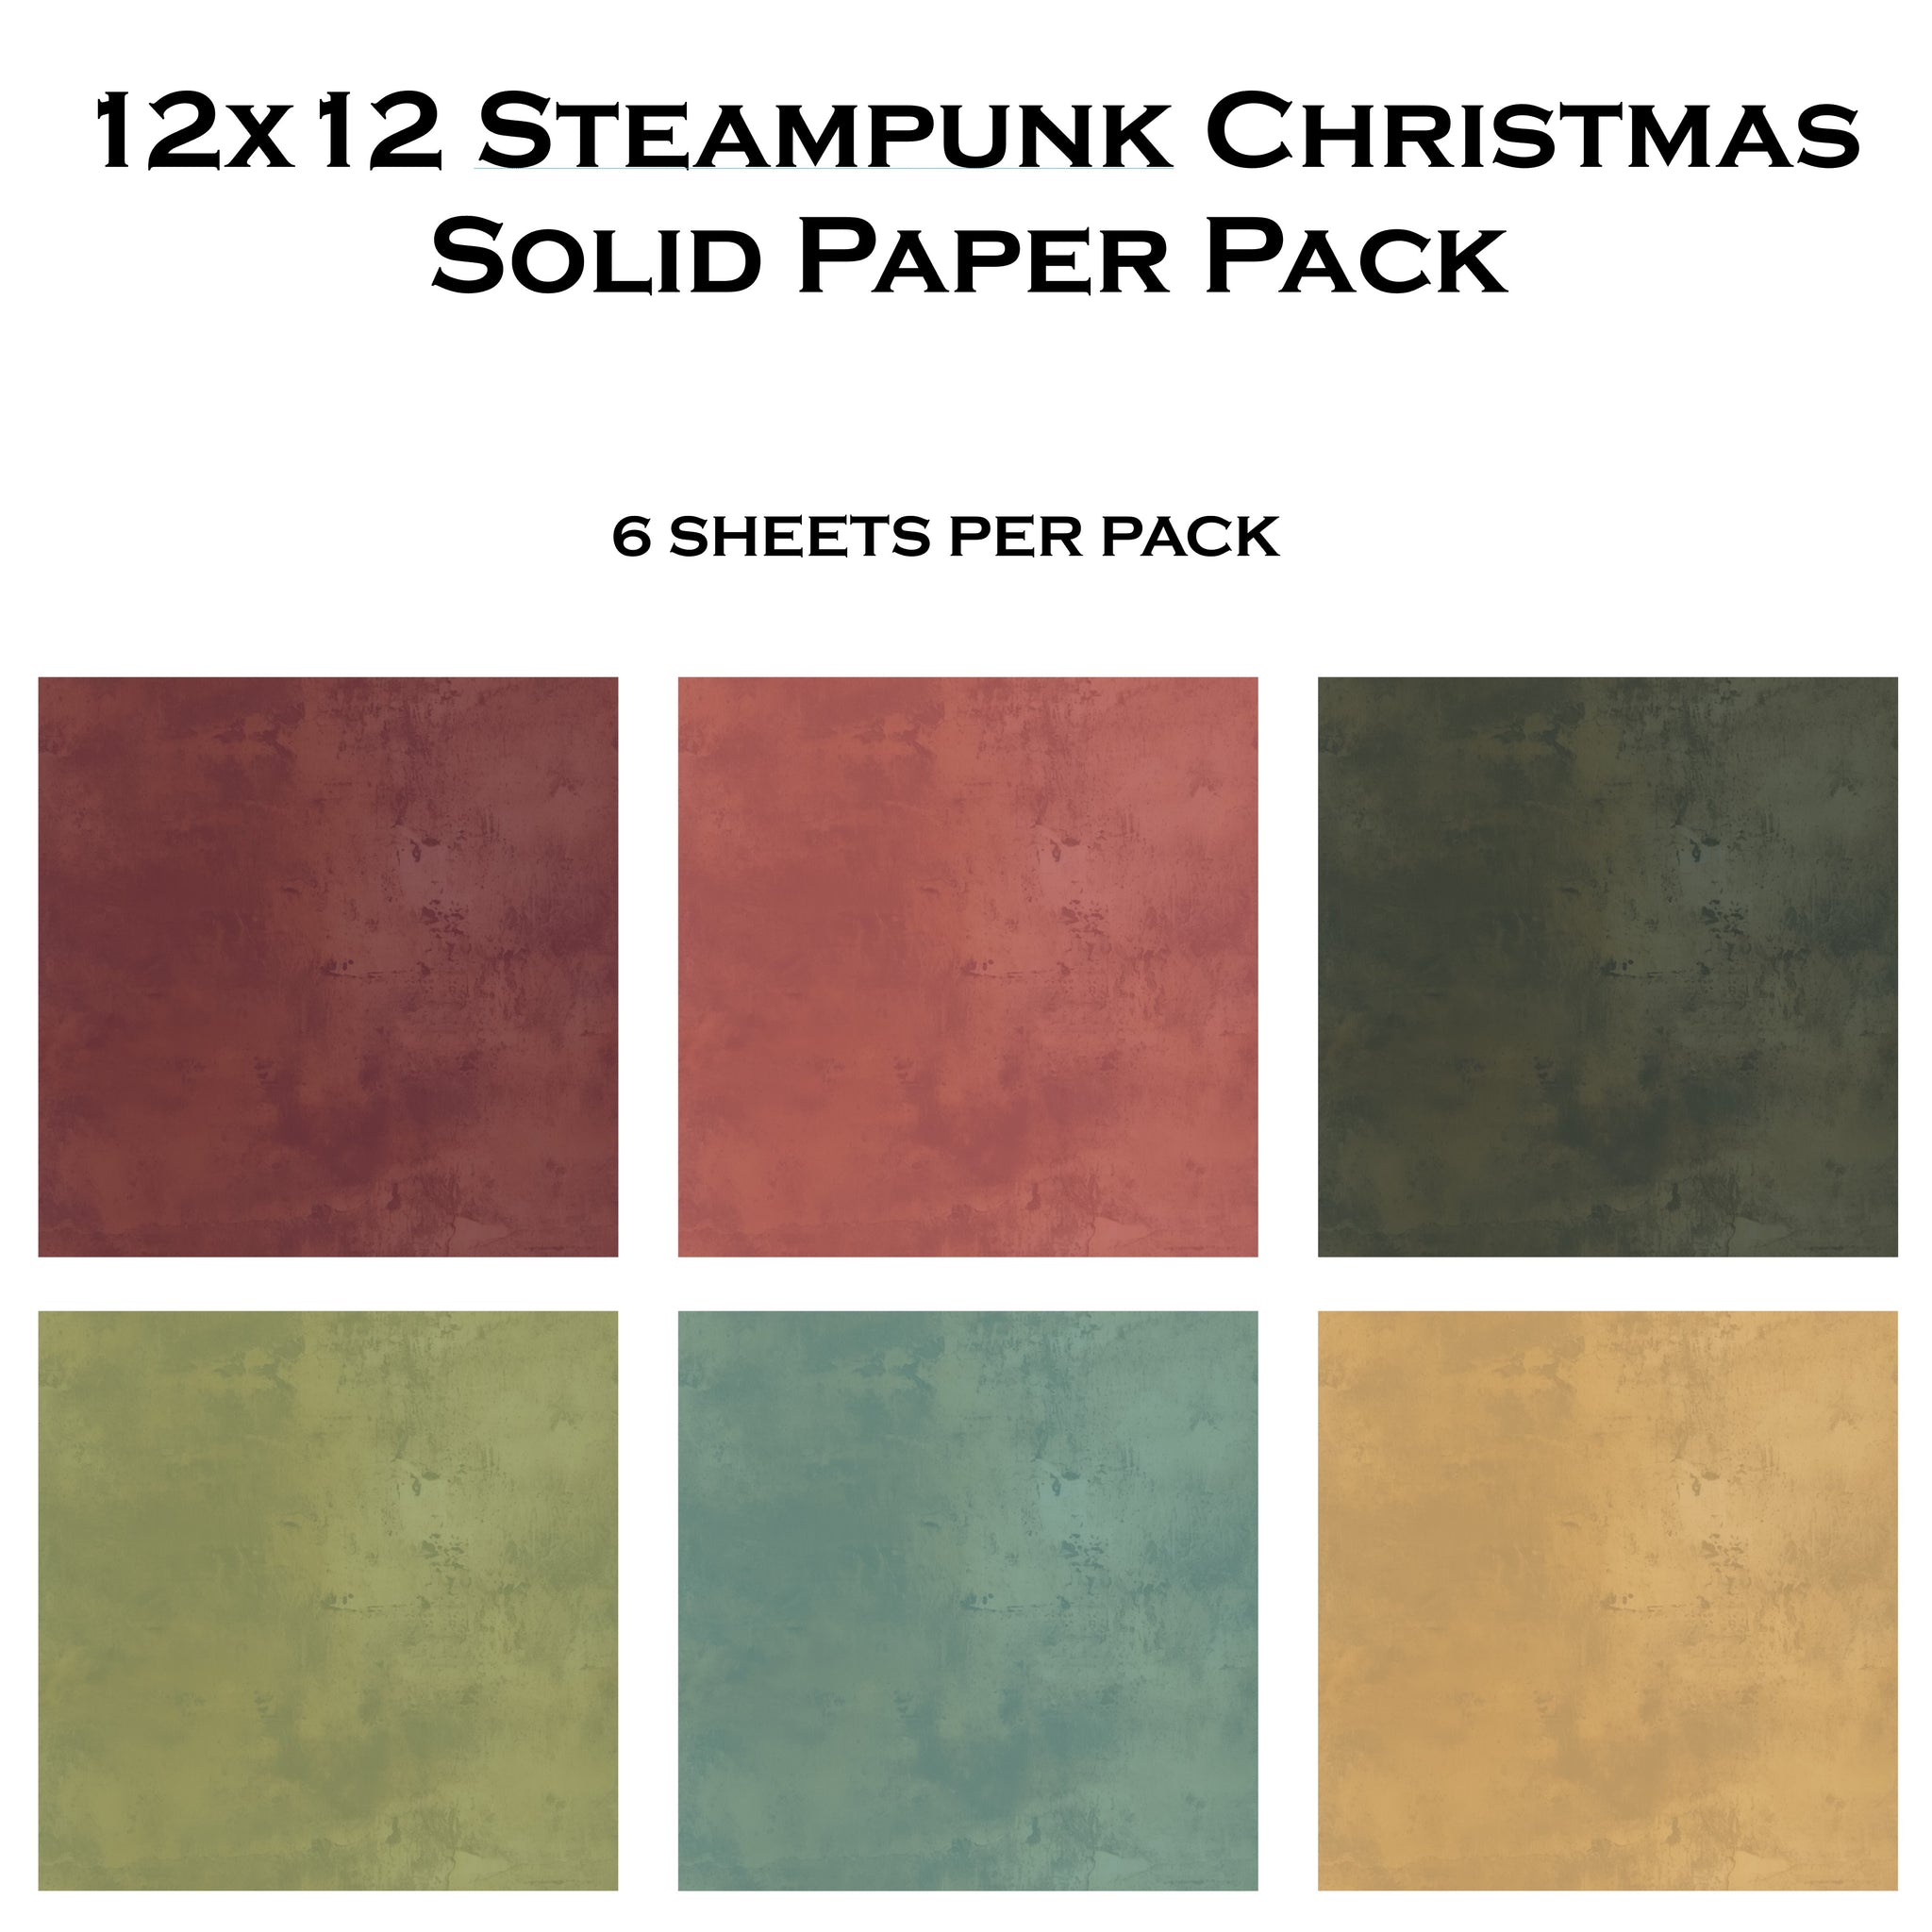 Steampunk Christmas 12x12 Solid Paper Pack